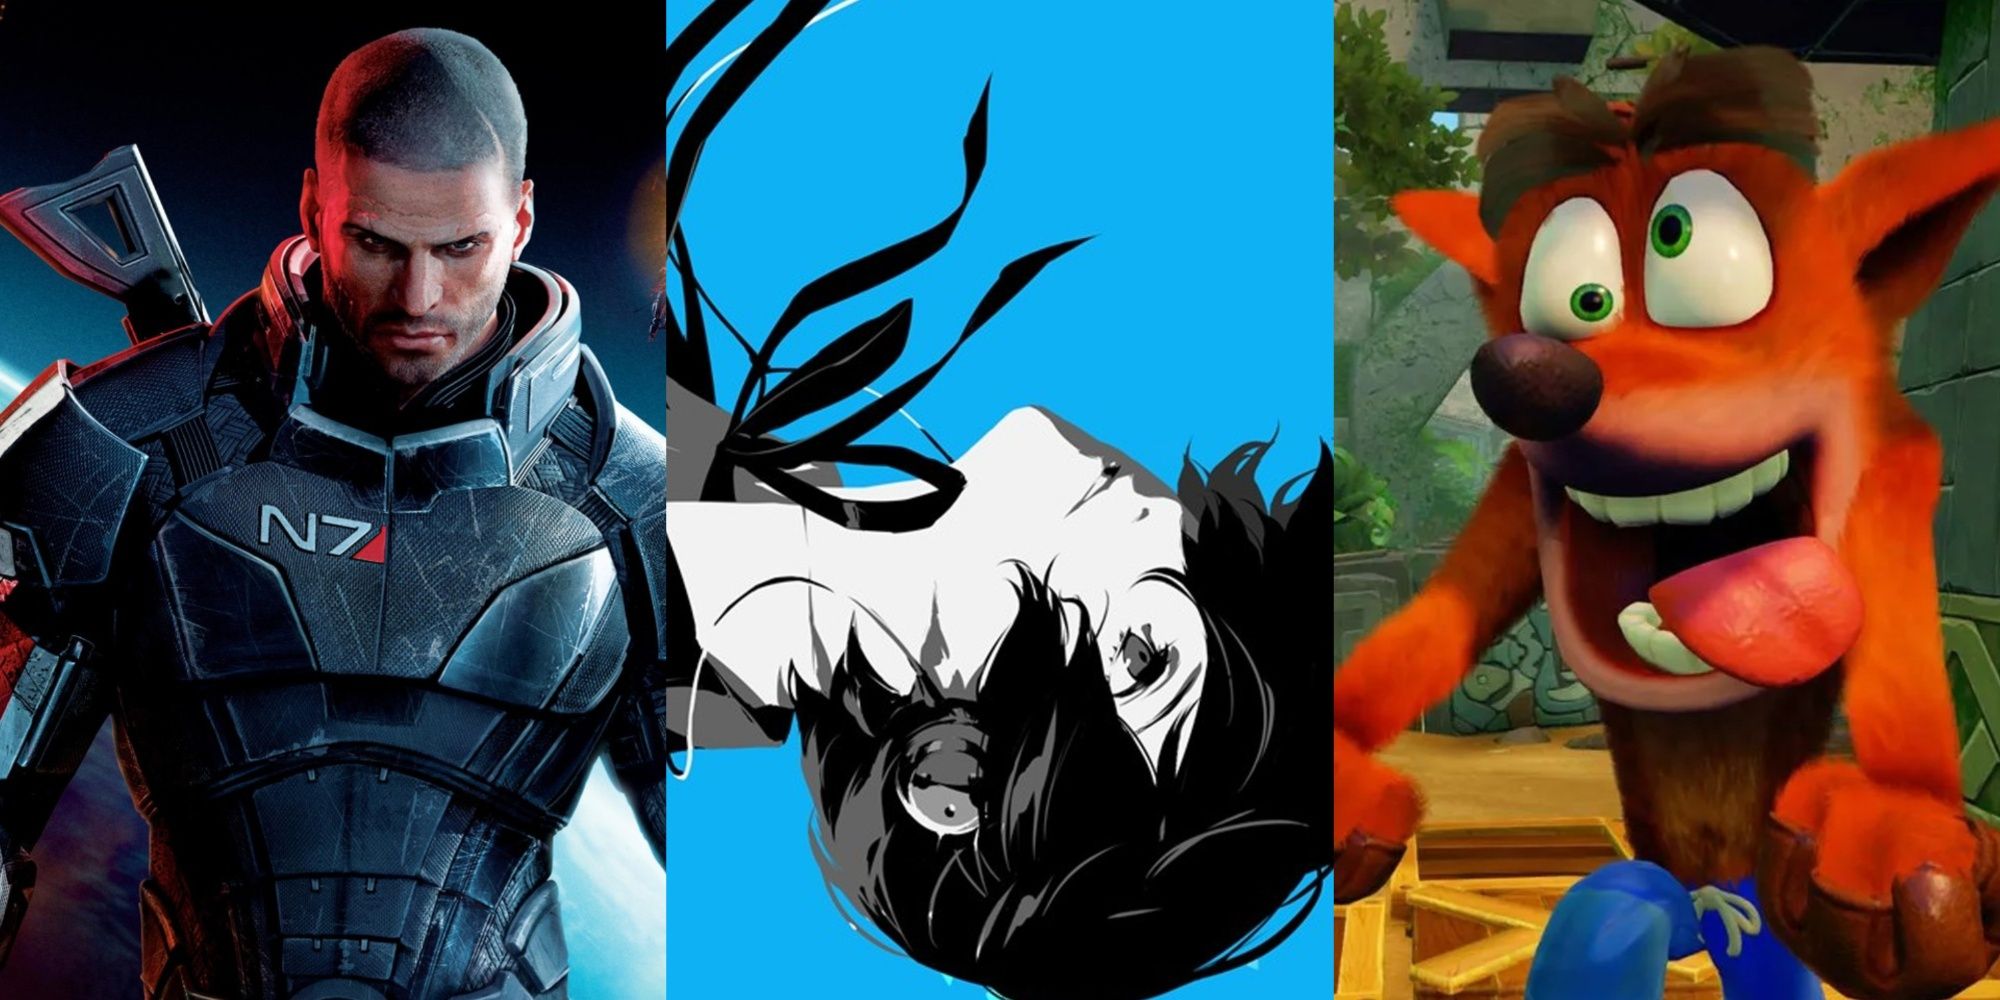 Collage image of Shepard from Mass Effect, Makoto from Persona 3, and Crash from Crash Bandicoot.